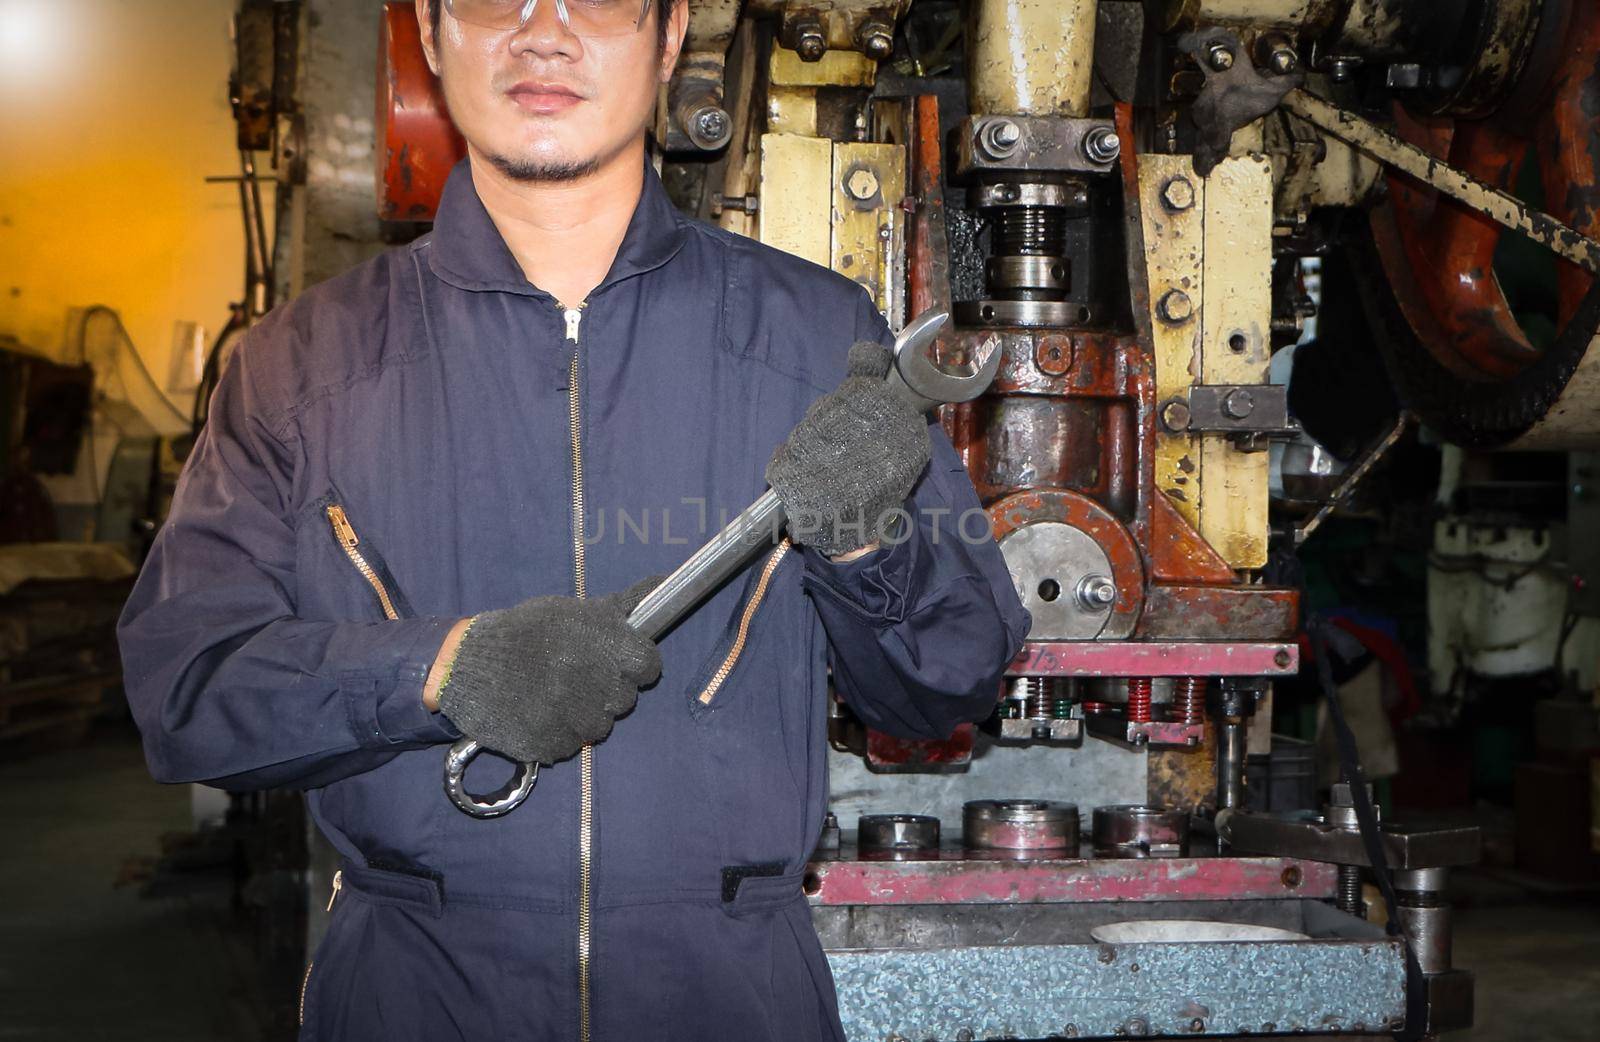 Asian male worker In industries that wear glasses, safety hats and safety uniforms Wrench tool holder stand Machine maintenance technician concept In the industry with confidence